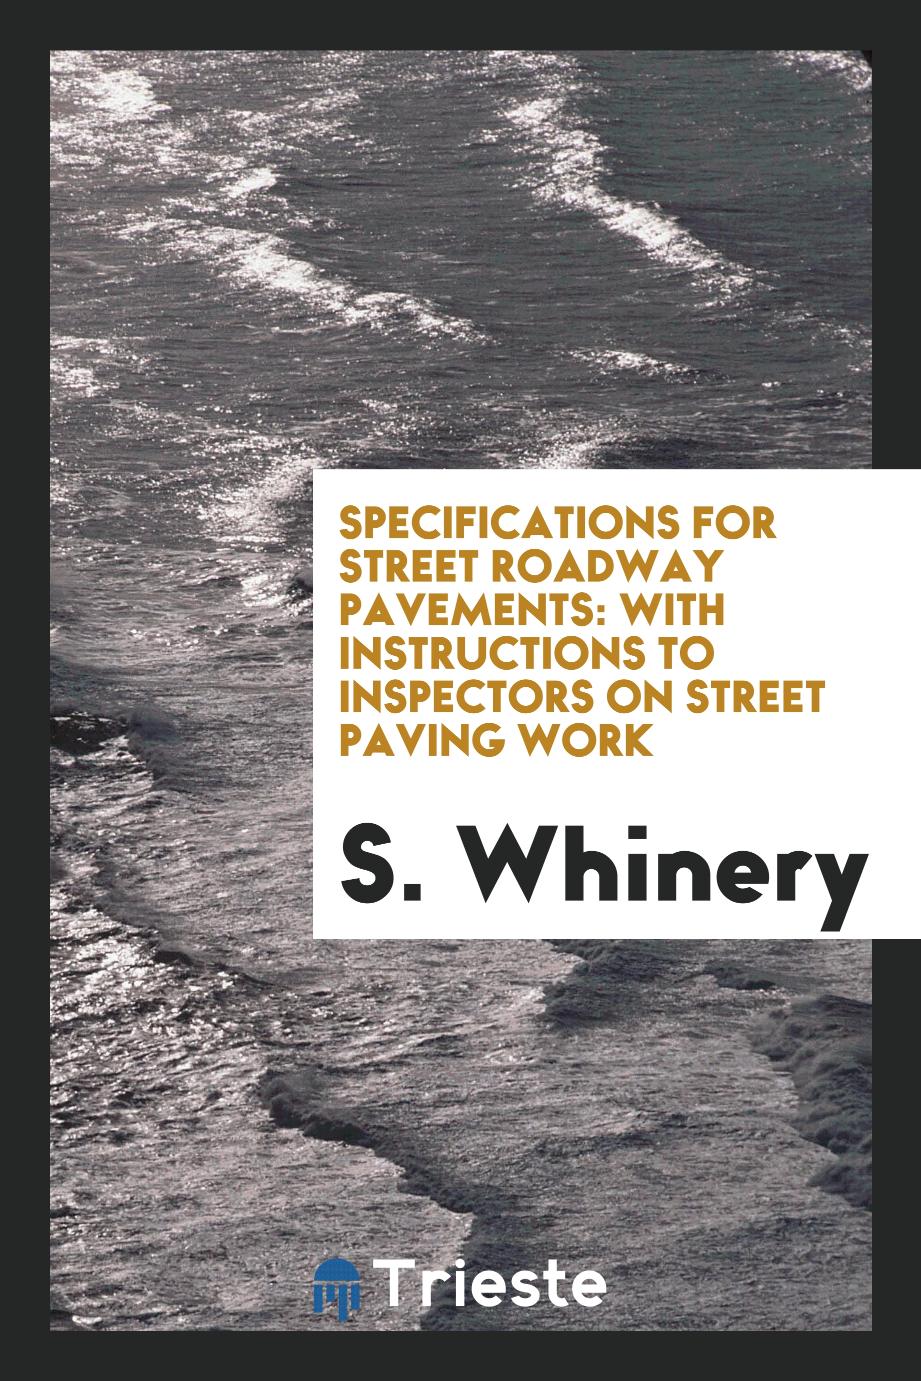 Specifications for Street Roadway Pavements: With Instructions to Inspectors on Street Paving Work